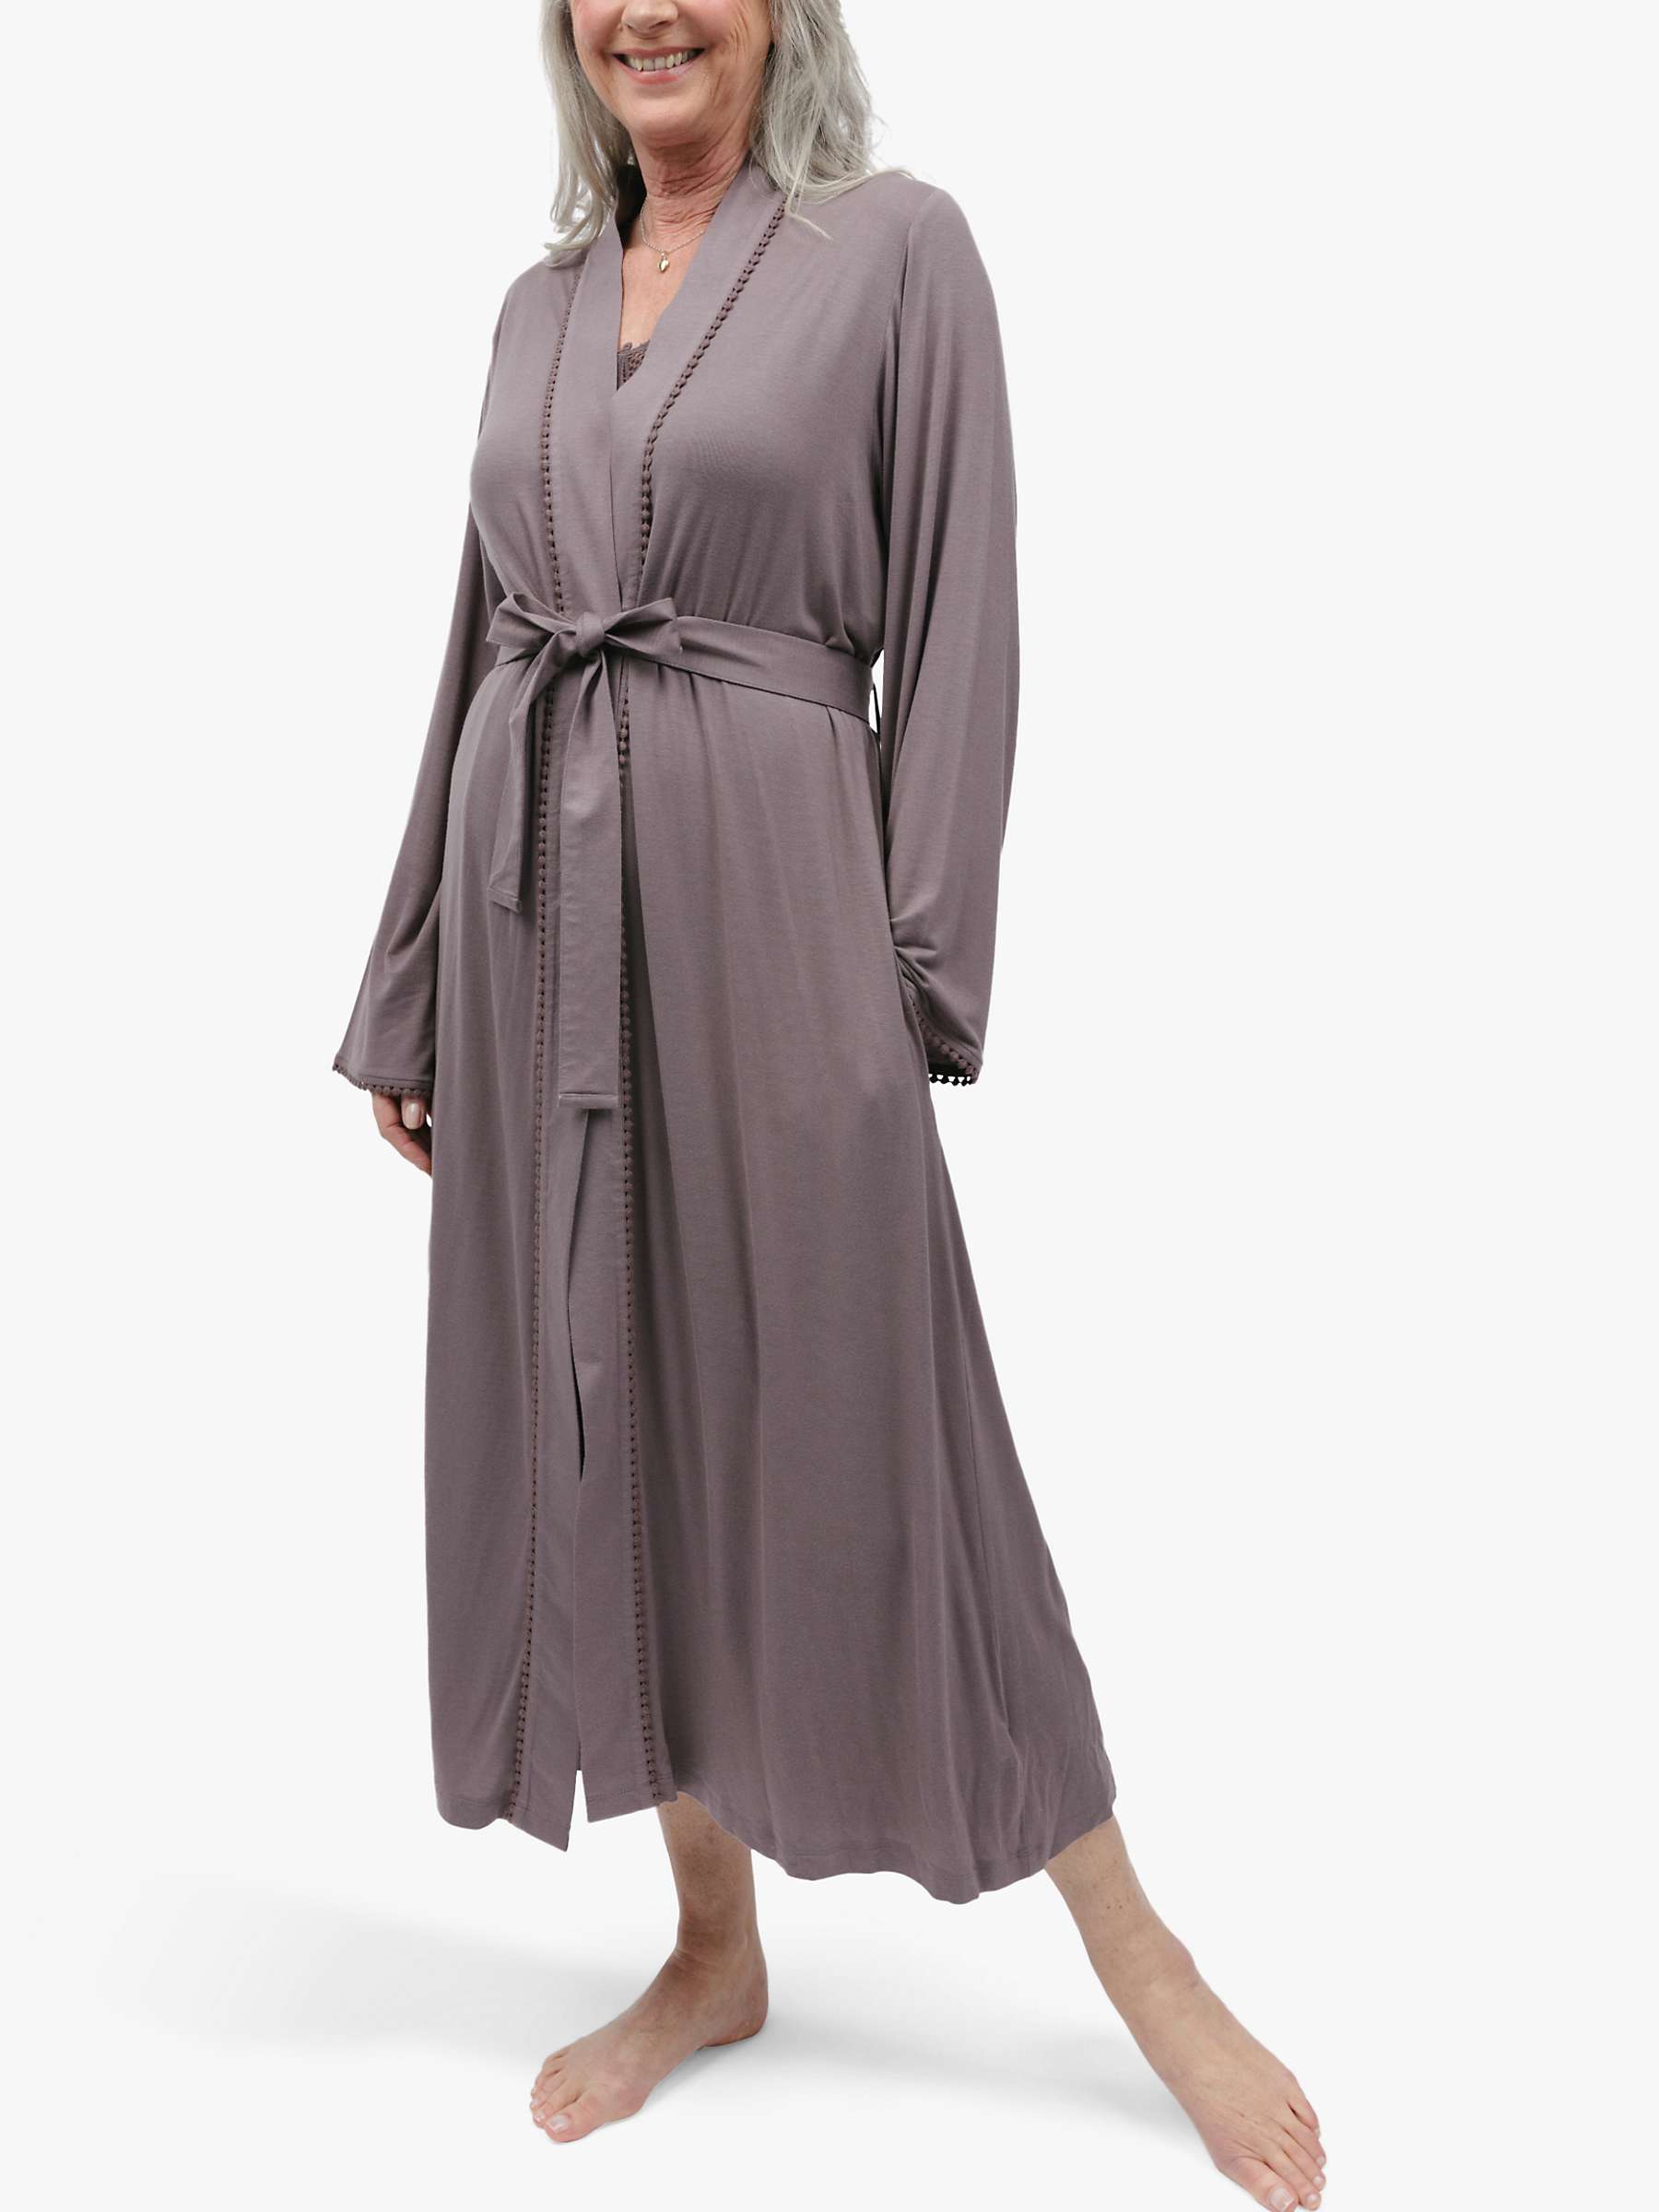 Buy Nora Rose by Cyberjammies Evette Long Dressing Gown, Taupe Online at johnlewis.com